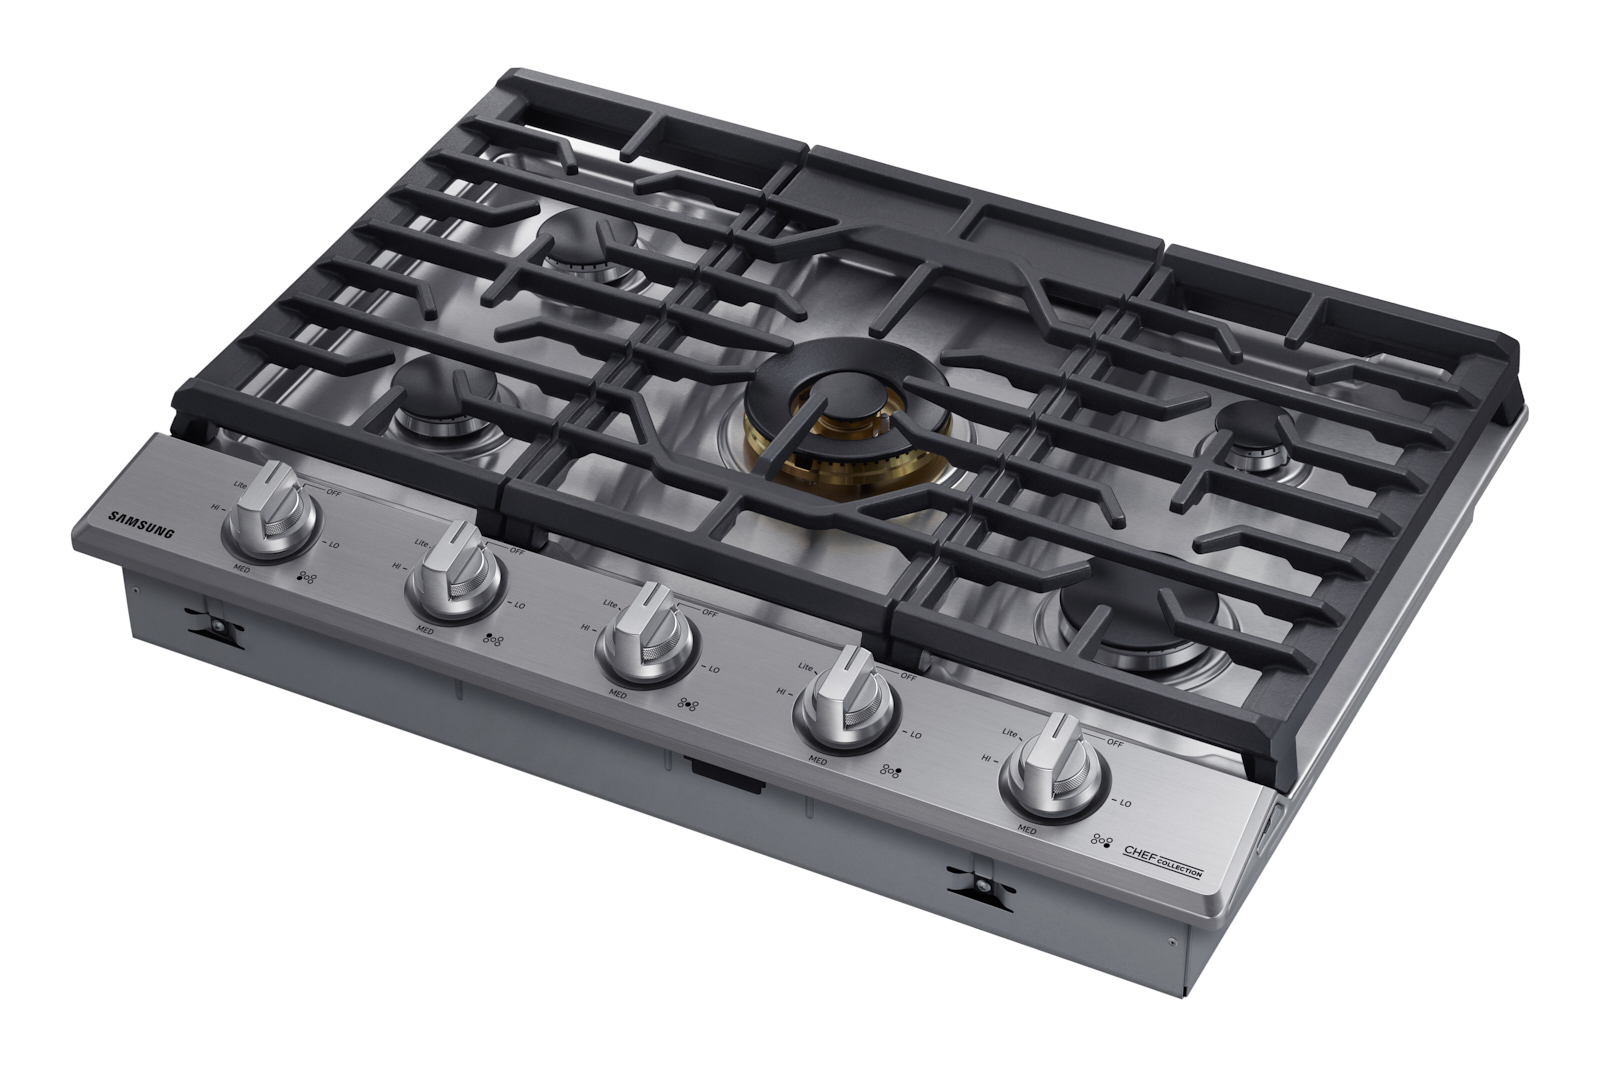 Sleek and Sophisticated: Enhancing Your Kitchen Décor with the Samsung NA30N7755TS Gas Cooktop